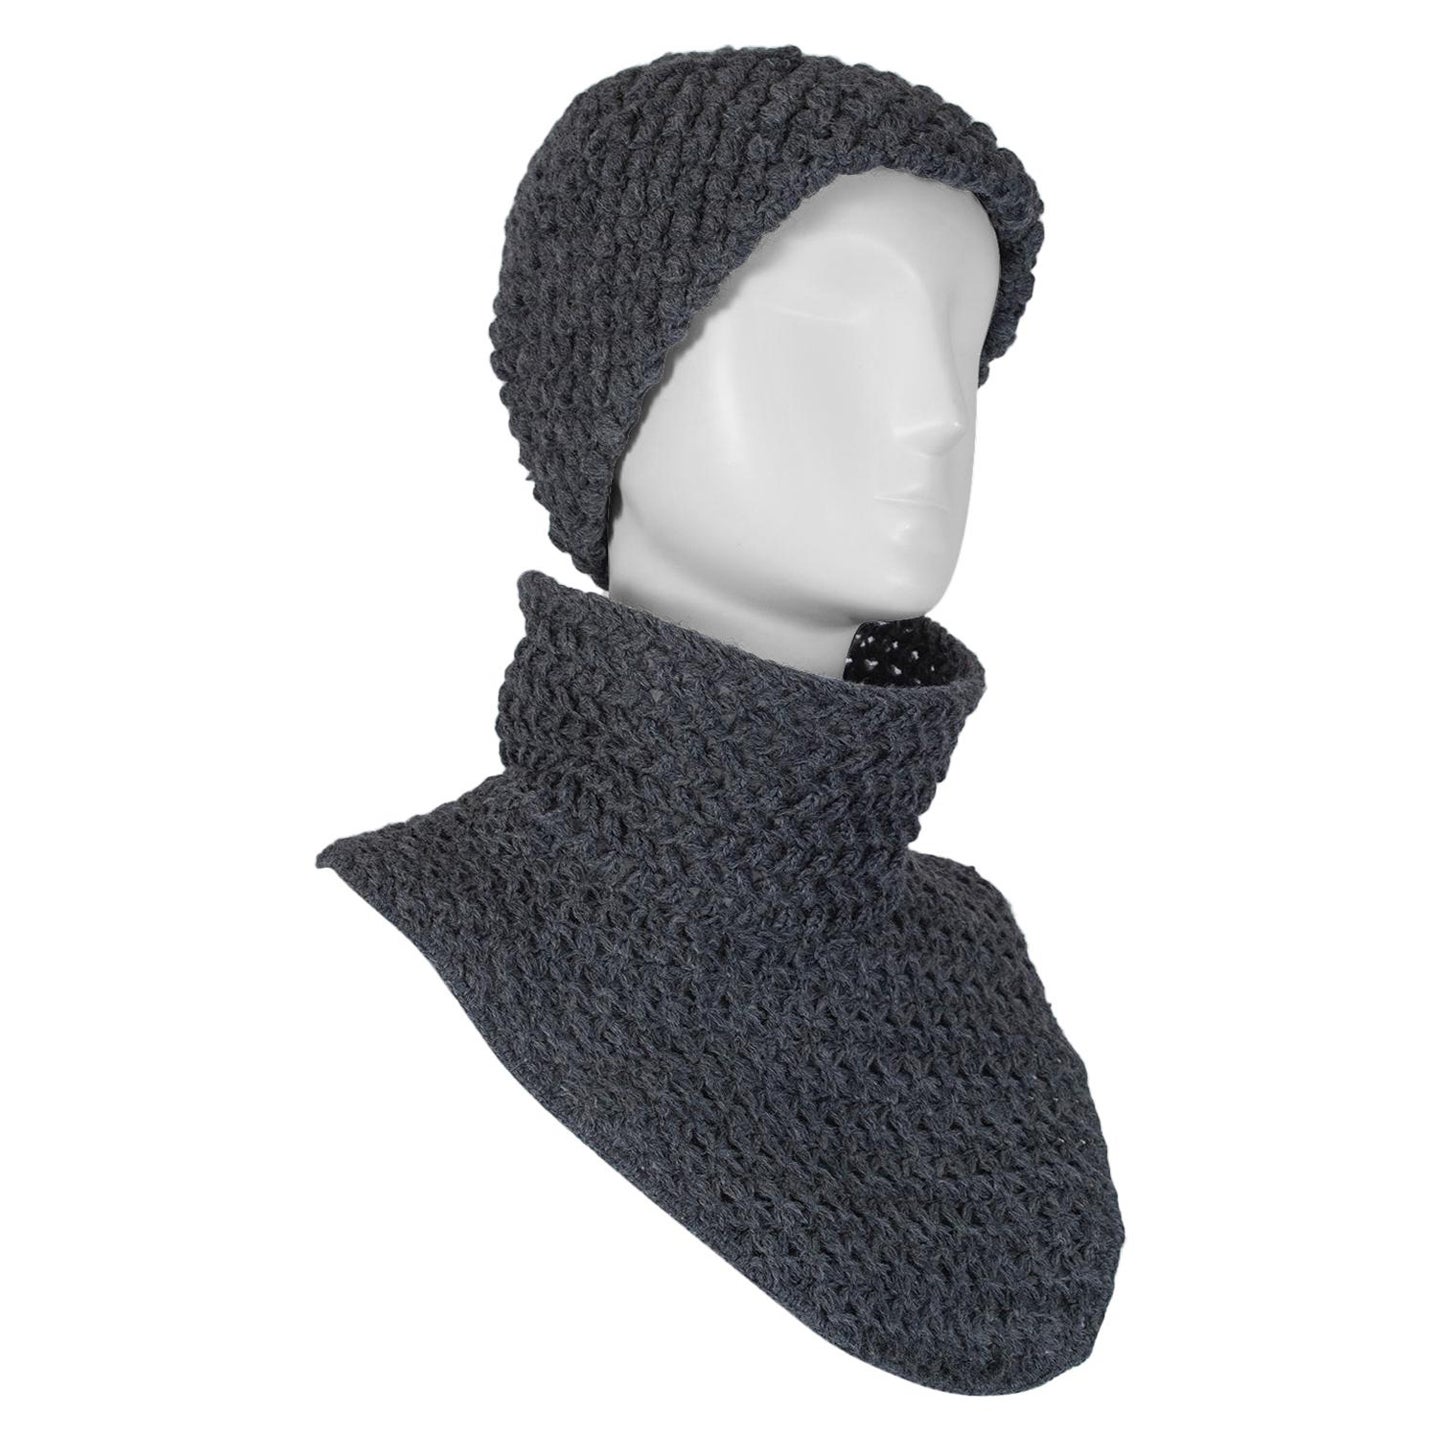 BH Wragge Charcoal Gray Knit Beanie Hat and Funnel Neckcloth Dickey - M, 1965 For Sale